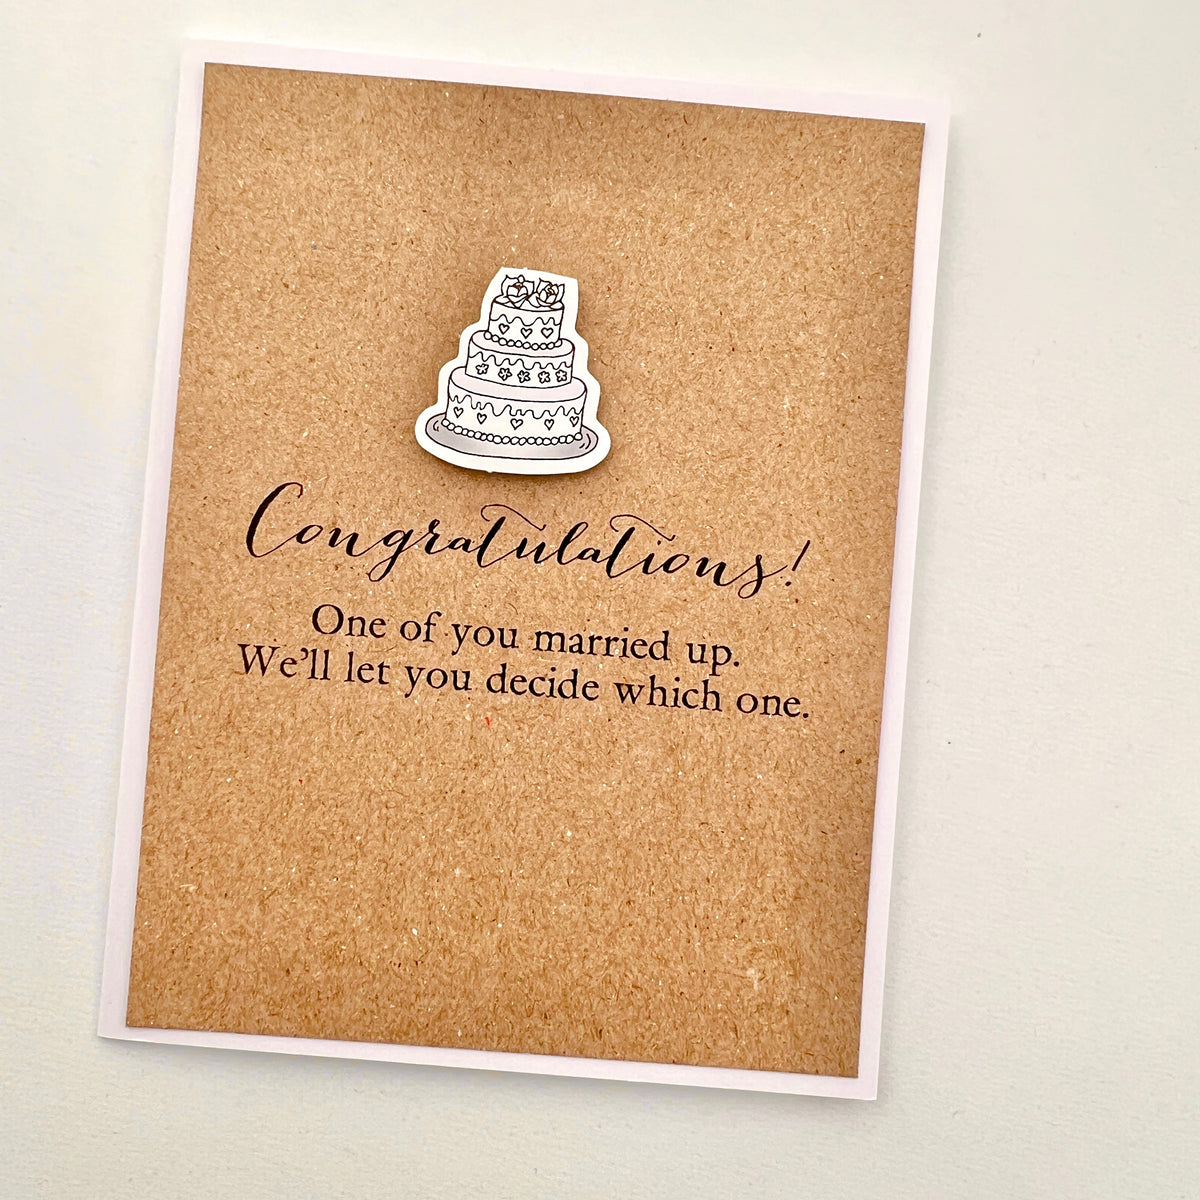 Wedding One of You Married Up card